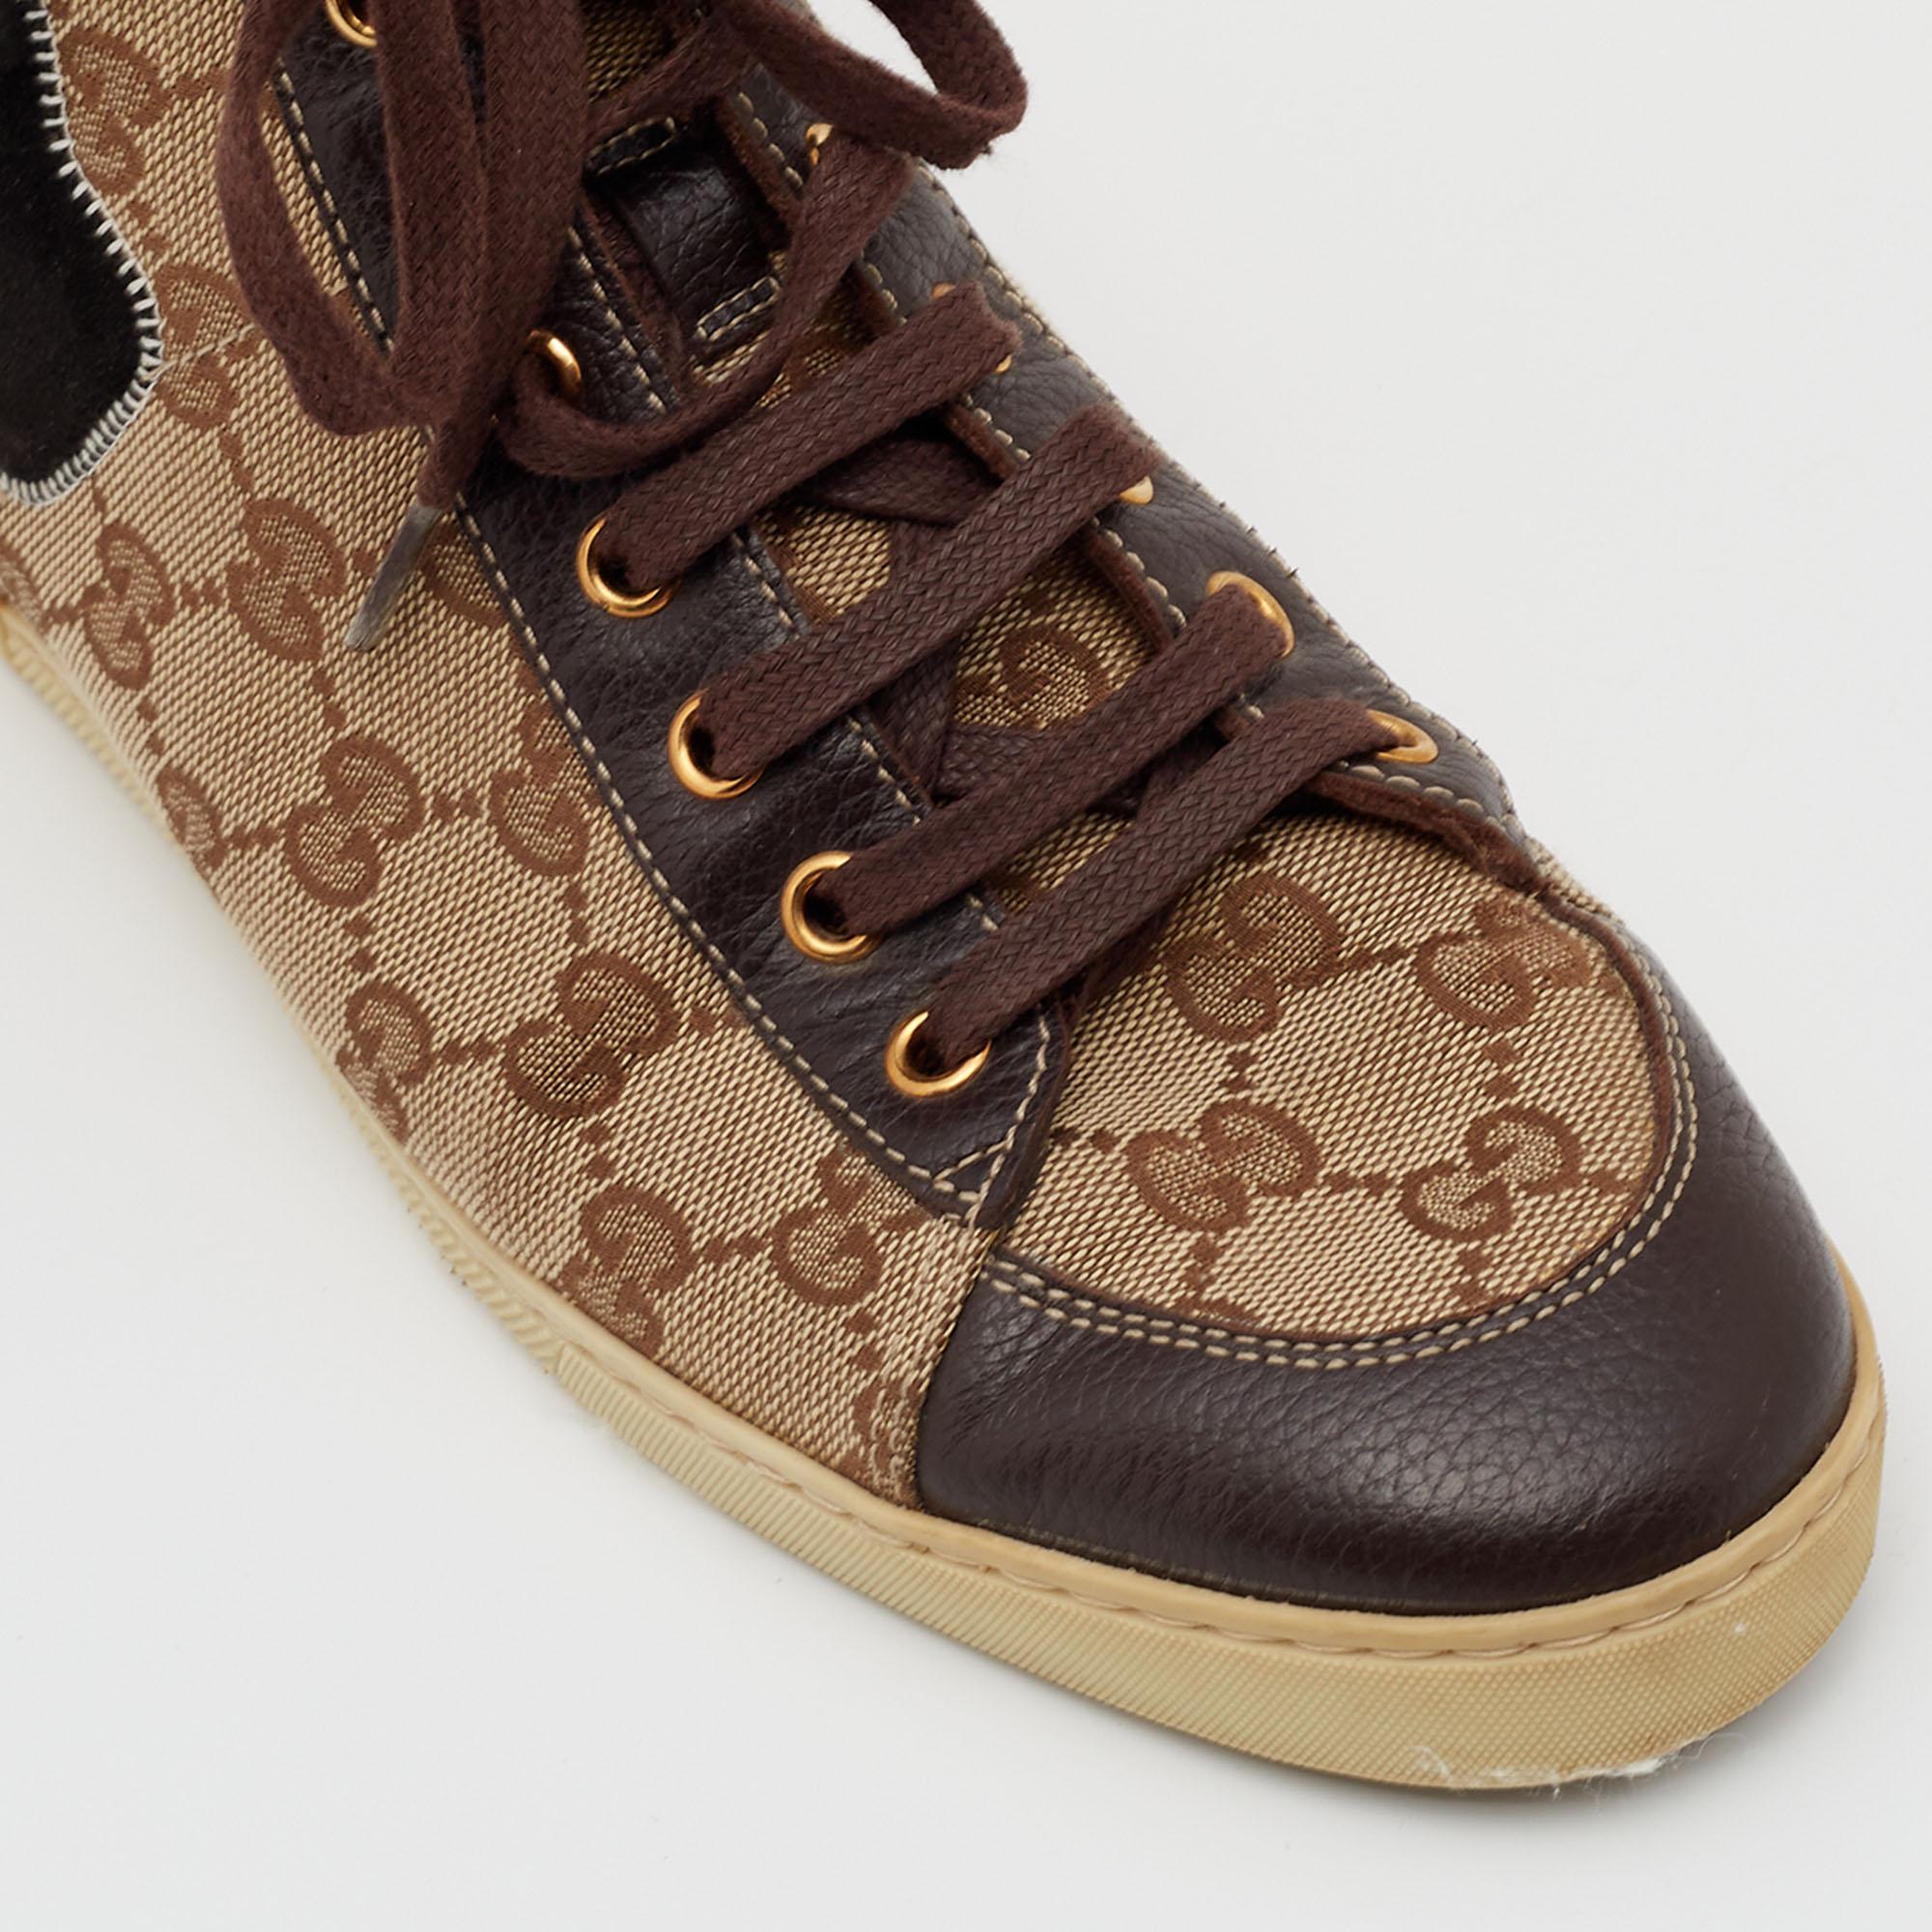 Gucci Beige/Brown Leather And GG Supreme Canvas High Top Sneakers Size 37 3